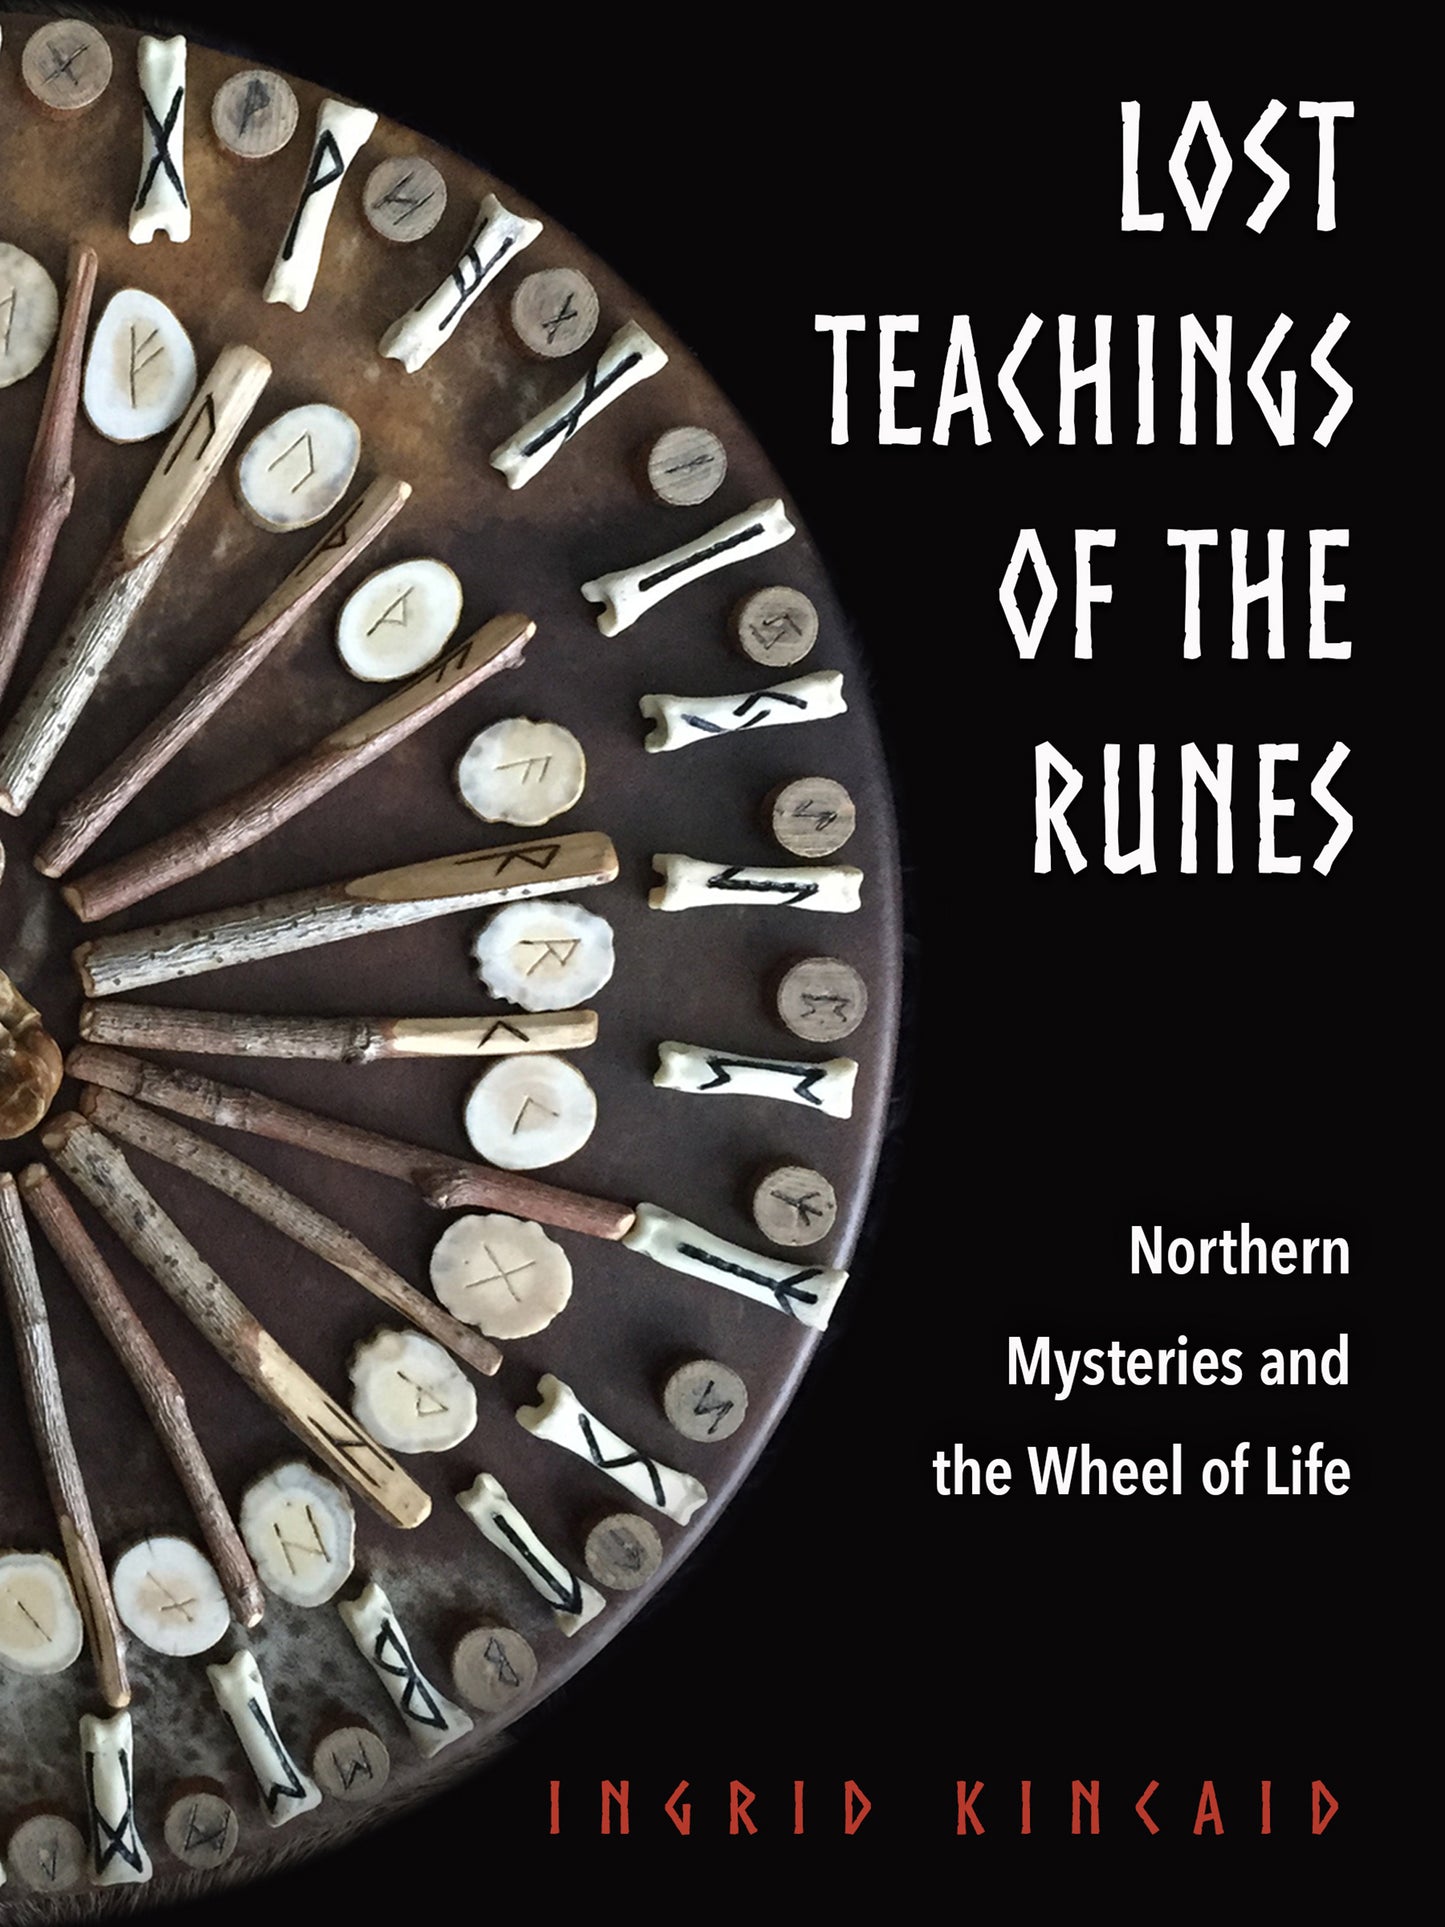 Lost Teaching of the Runes